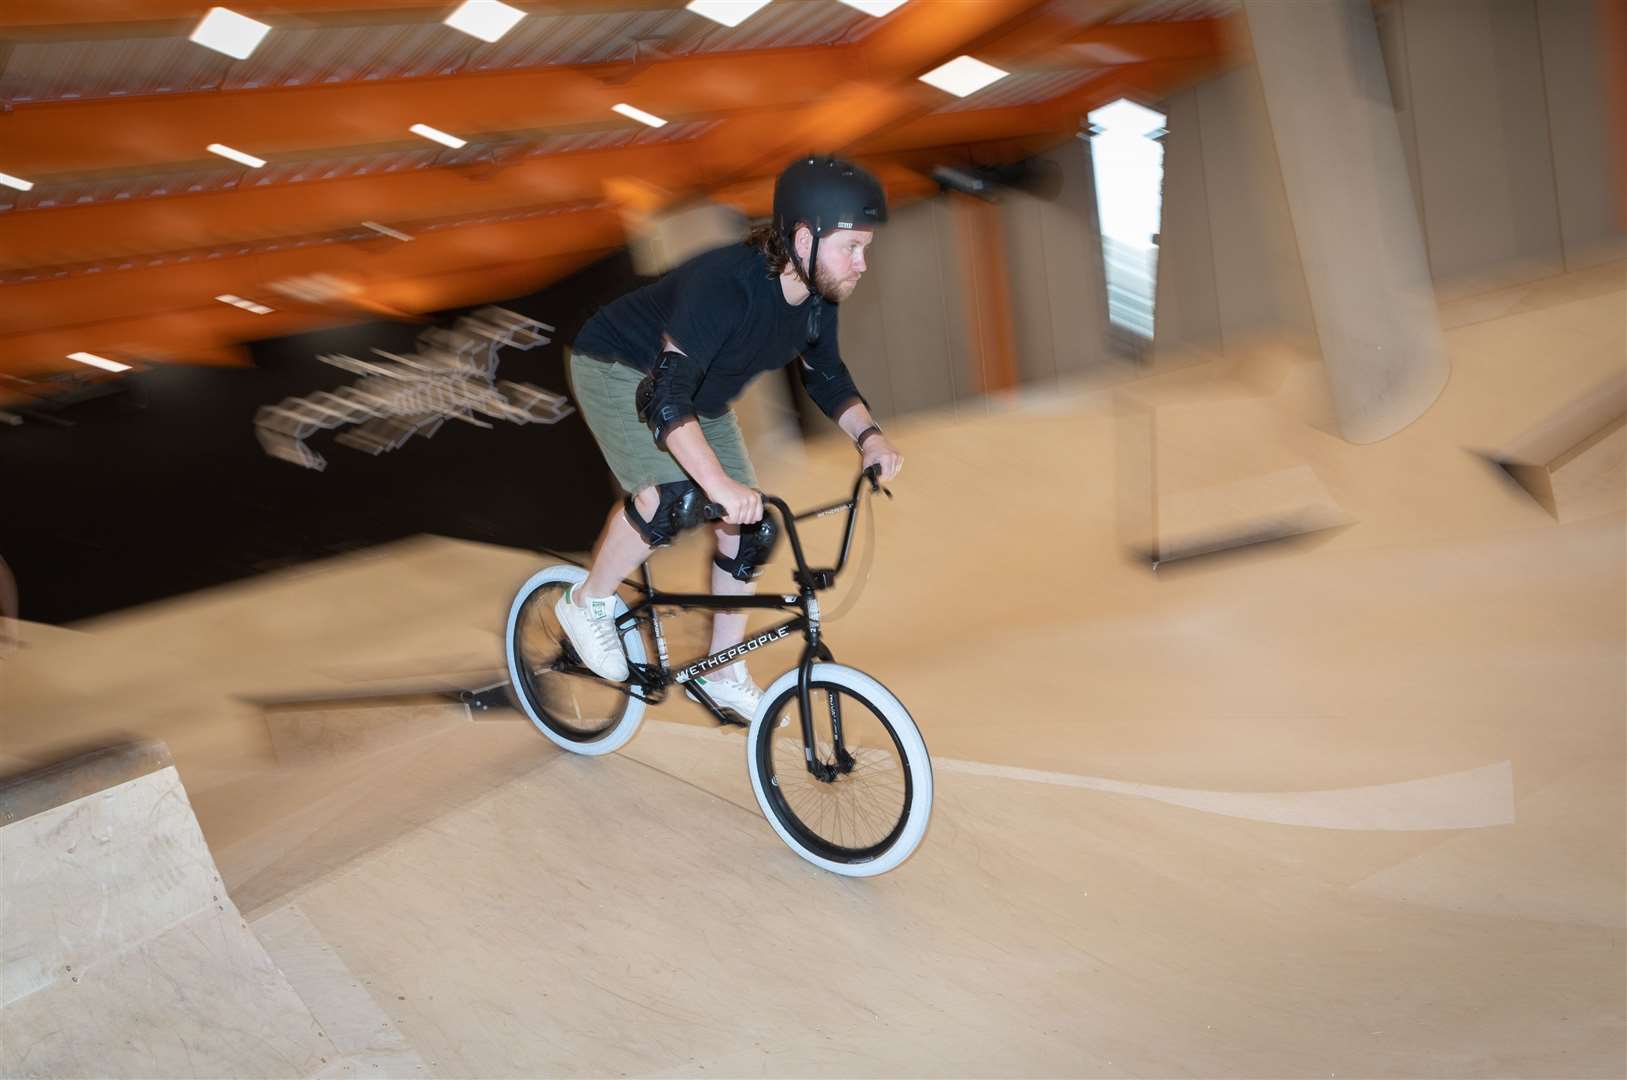 Reporter Rhys Griffiths takes his first BMX lesson at F51 skate park in Folkestone. Picture: Andy Jones